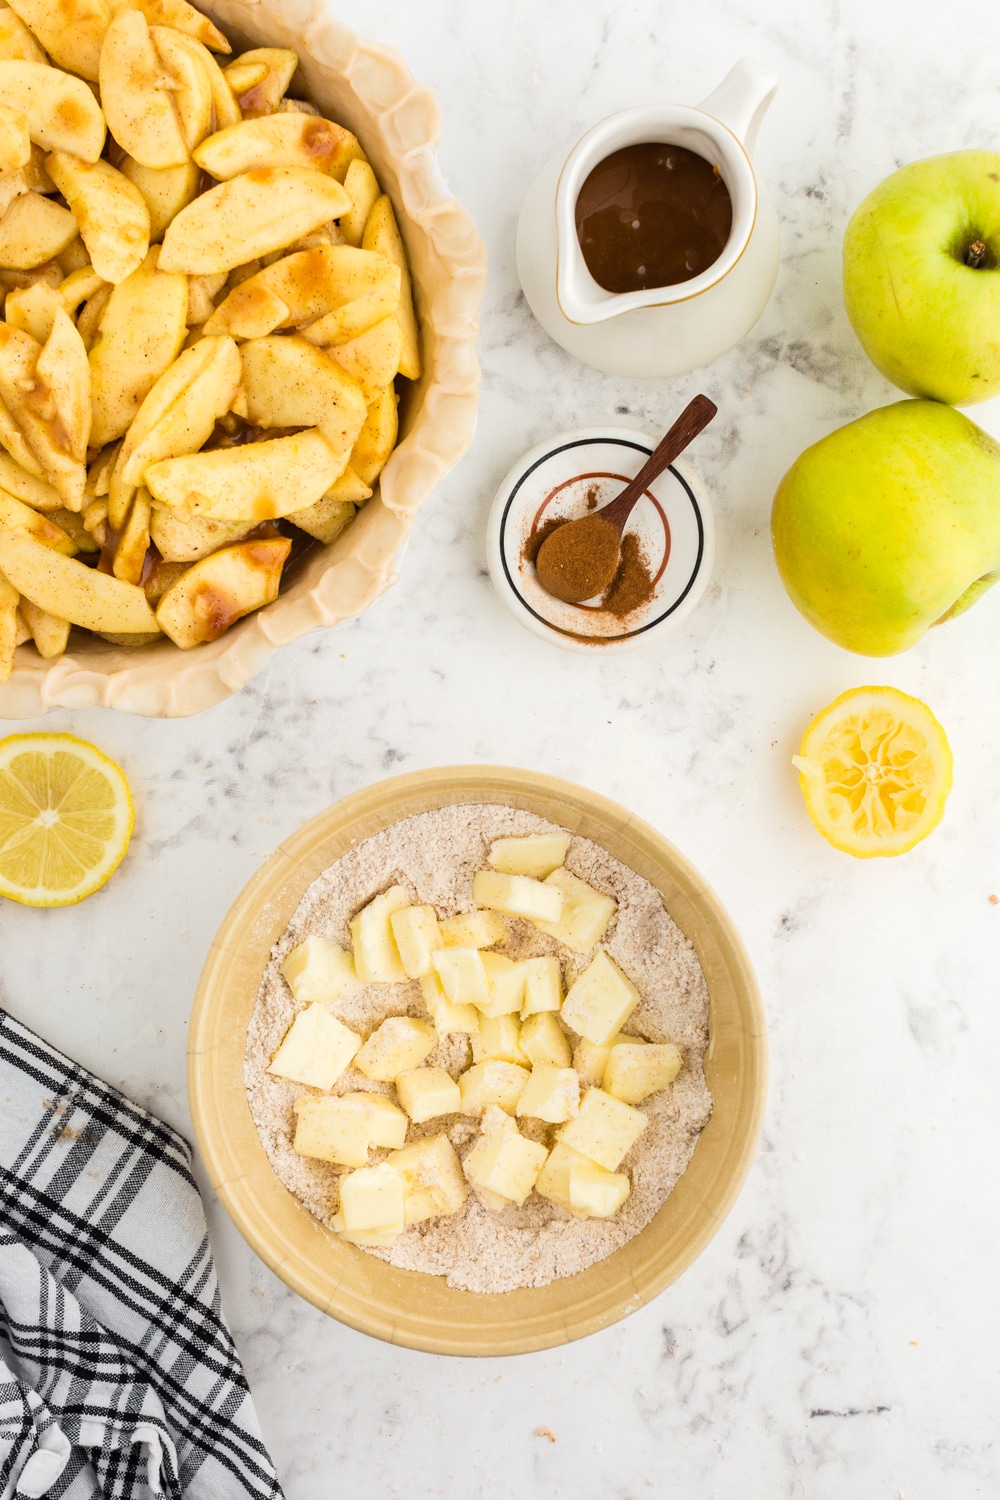 Bowl with dry streusel topping ingredients and cubed butter, black and white checkered linen, whole green apples, sliced lemons, jug of caramel sauce, small bowl of nutmeg and cinnamon, apple pie mixture in a prepared pie dish, on a white marble countertop.